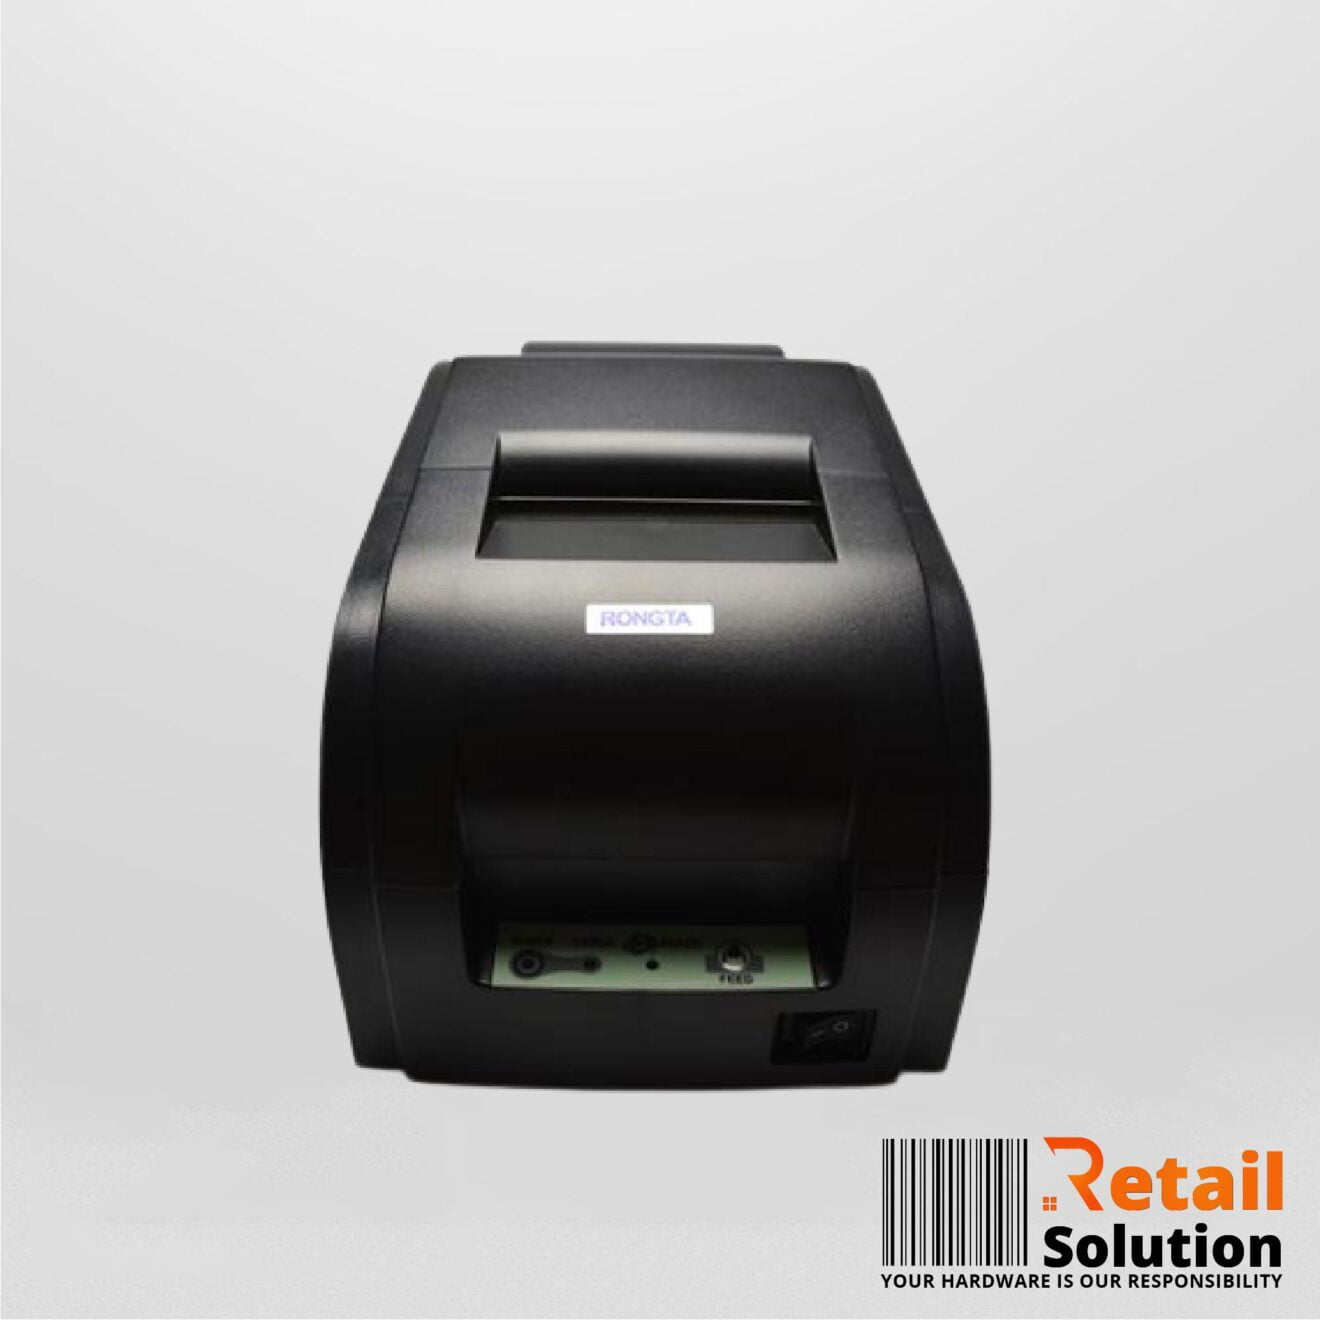 Rongta Rp330 Thermal Receipt Printer Retail Solution 6616